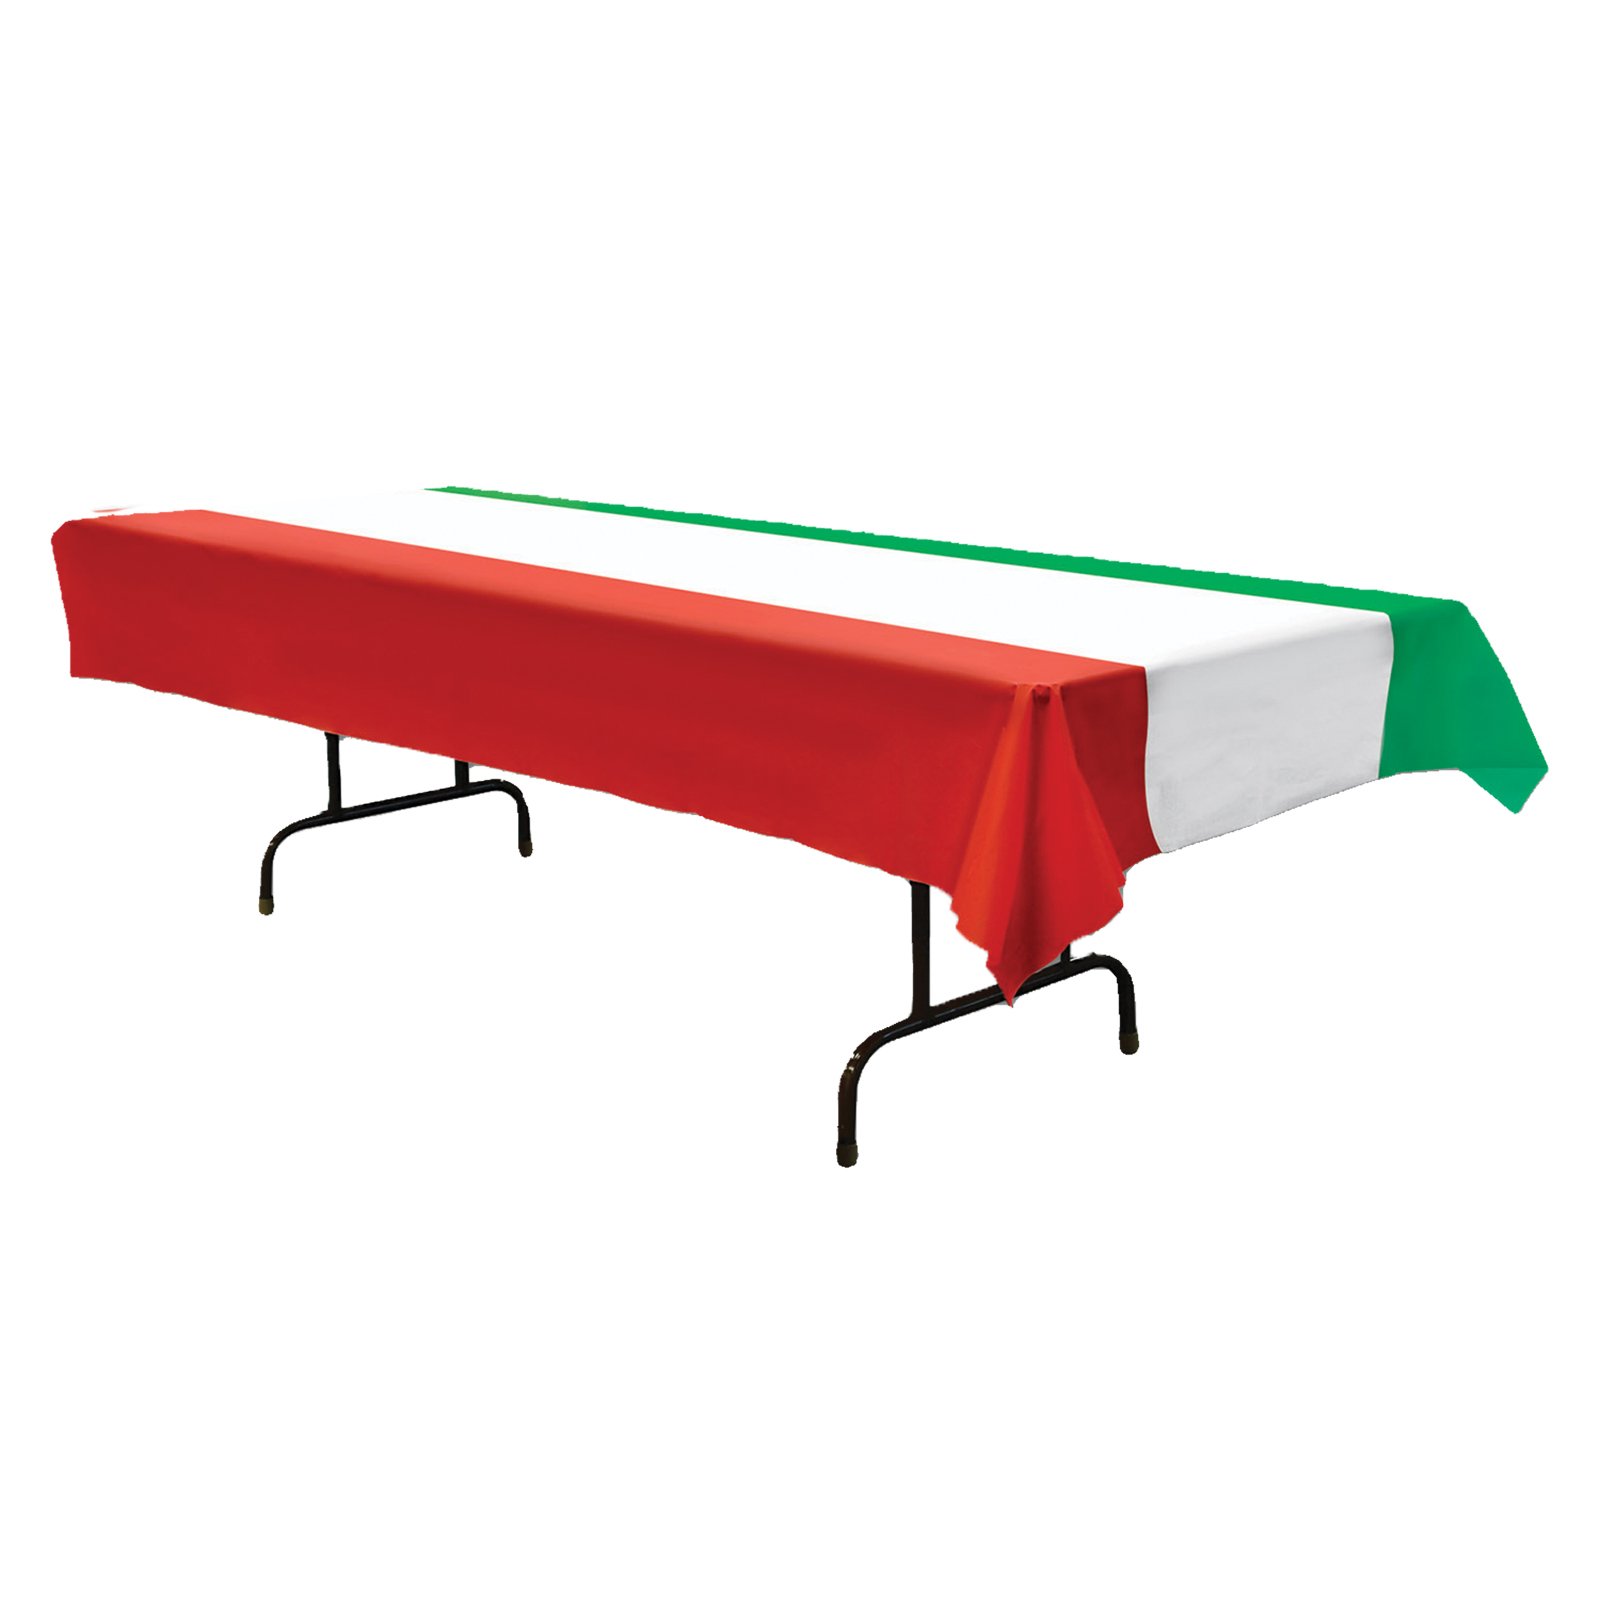 9' Red, White, and Green Striped Table Cover PEVA